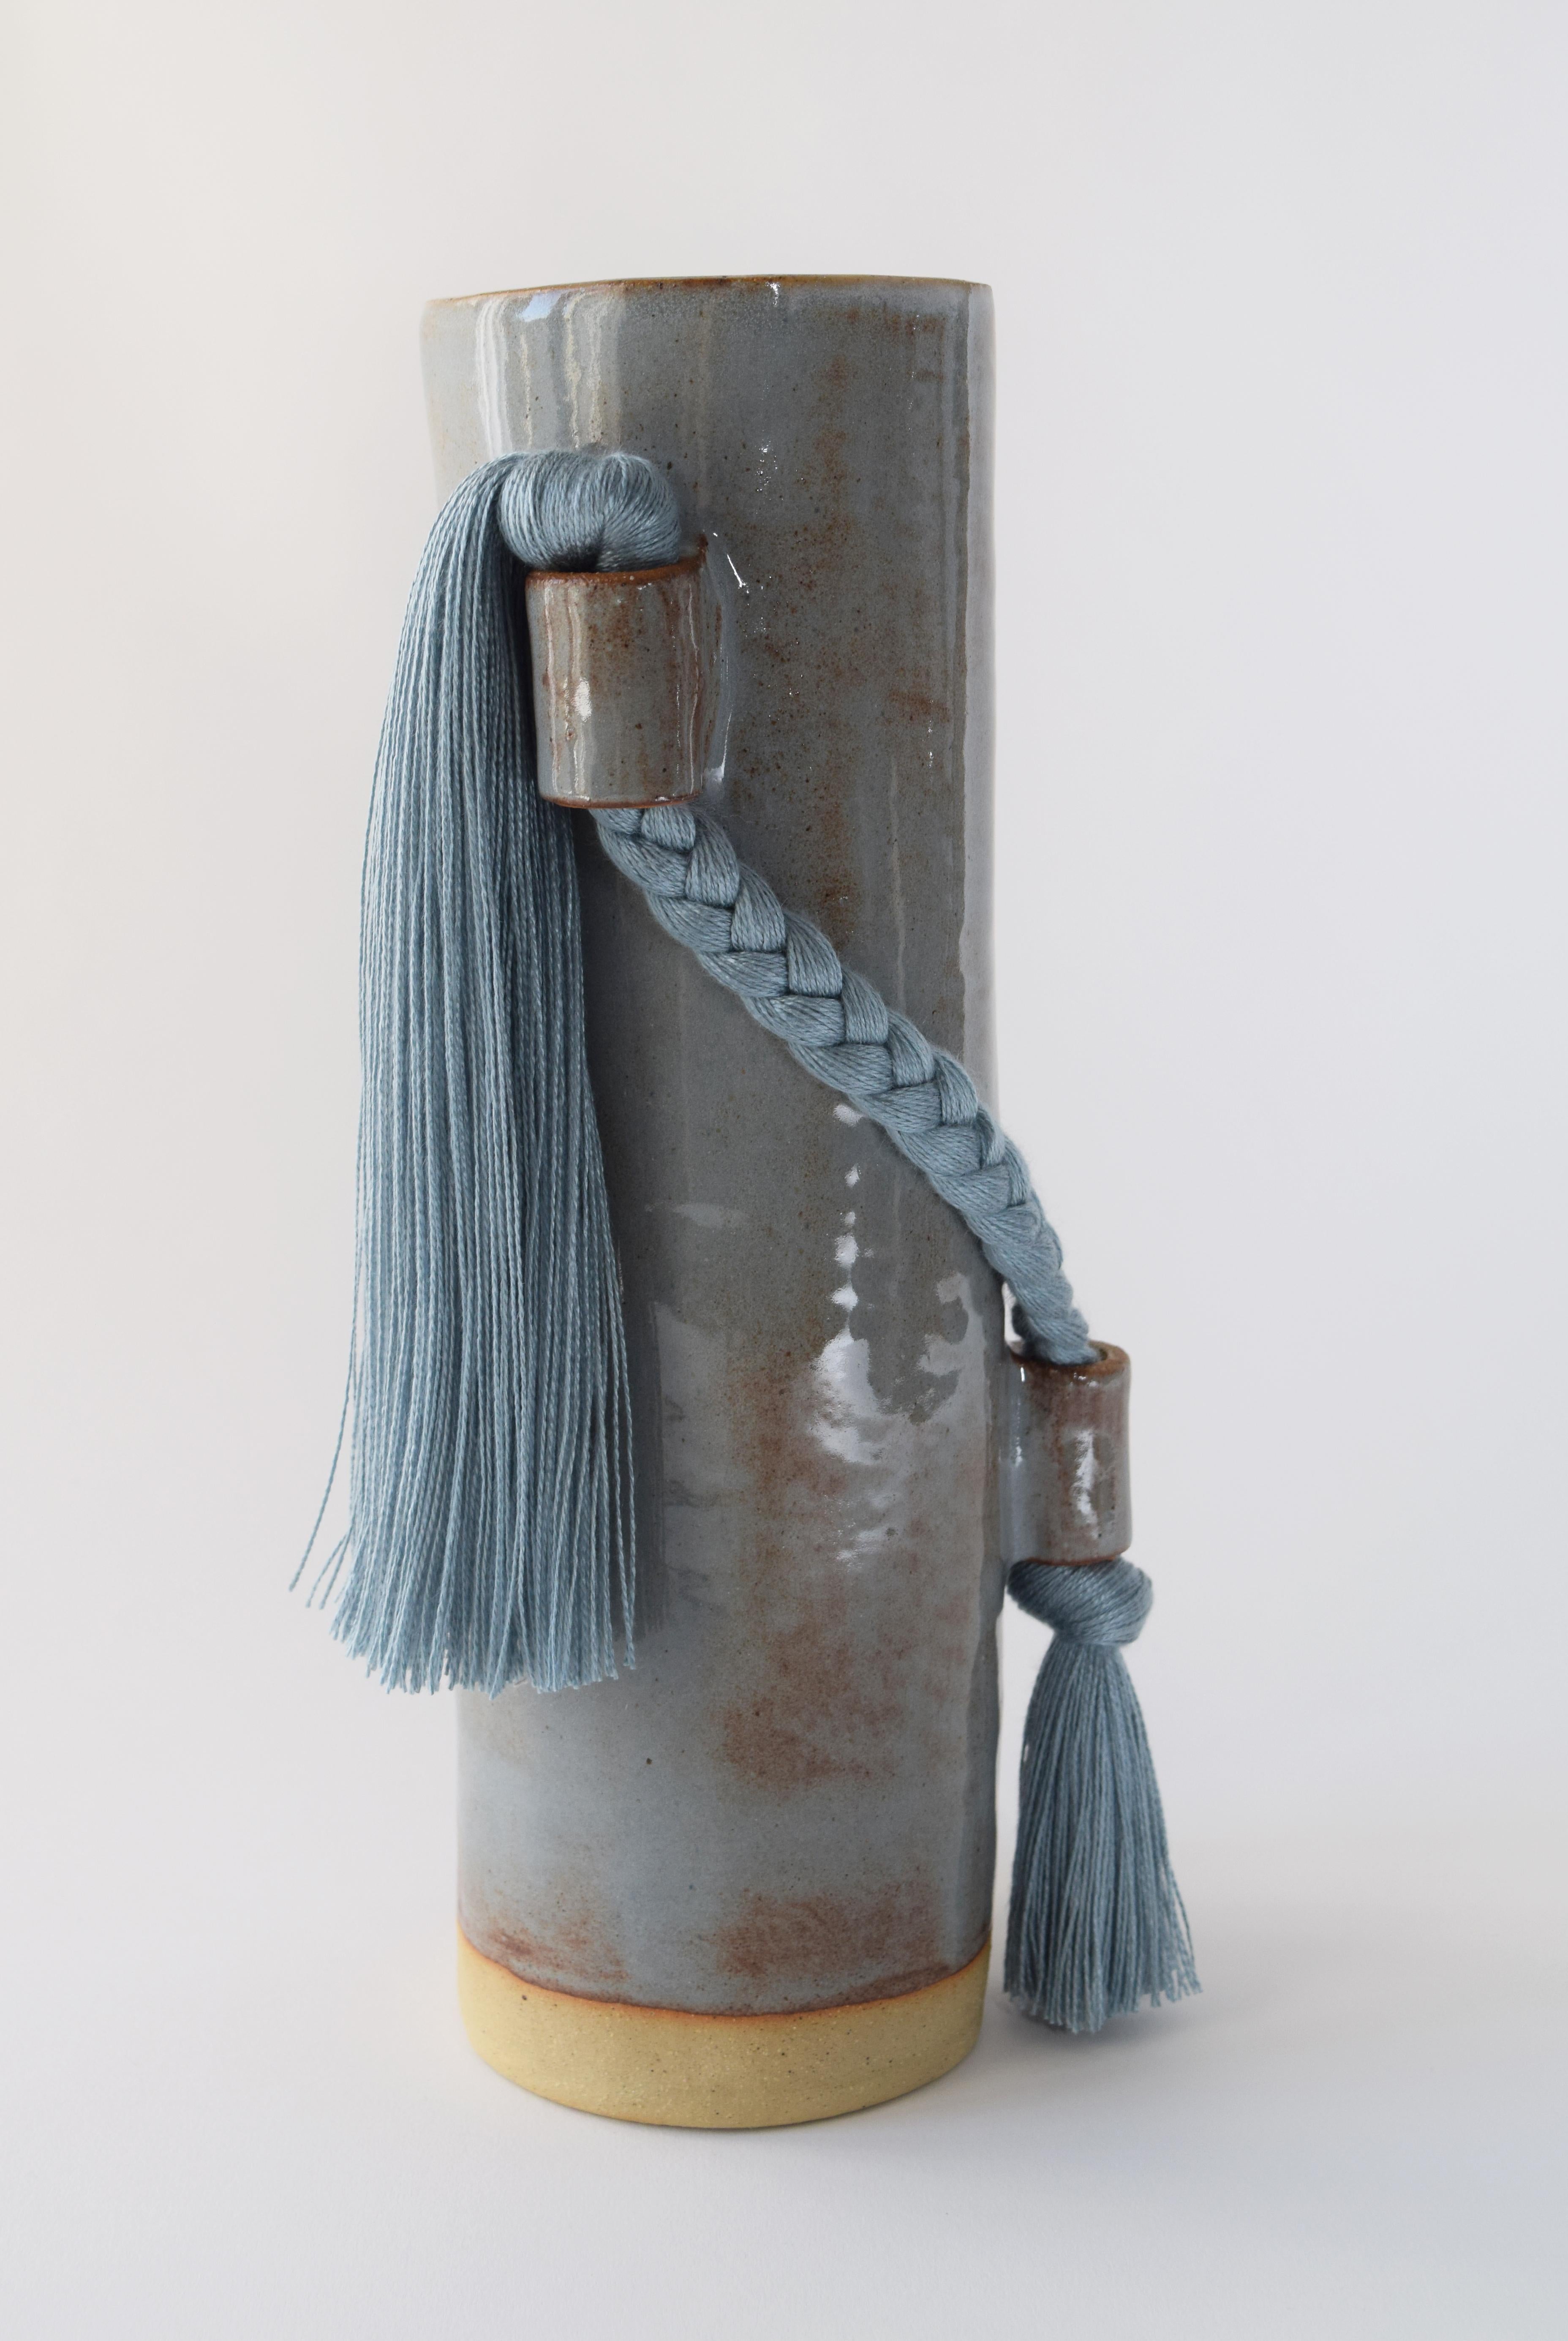 Vase #695 by Karen Gayle Tinney

Equal parts functional and sculptural, this vase is the perfect size for a small bouquet but packs enough detail for it to stand alone as a decorative object on a shelf or table.

Hand formed stoneware with blue